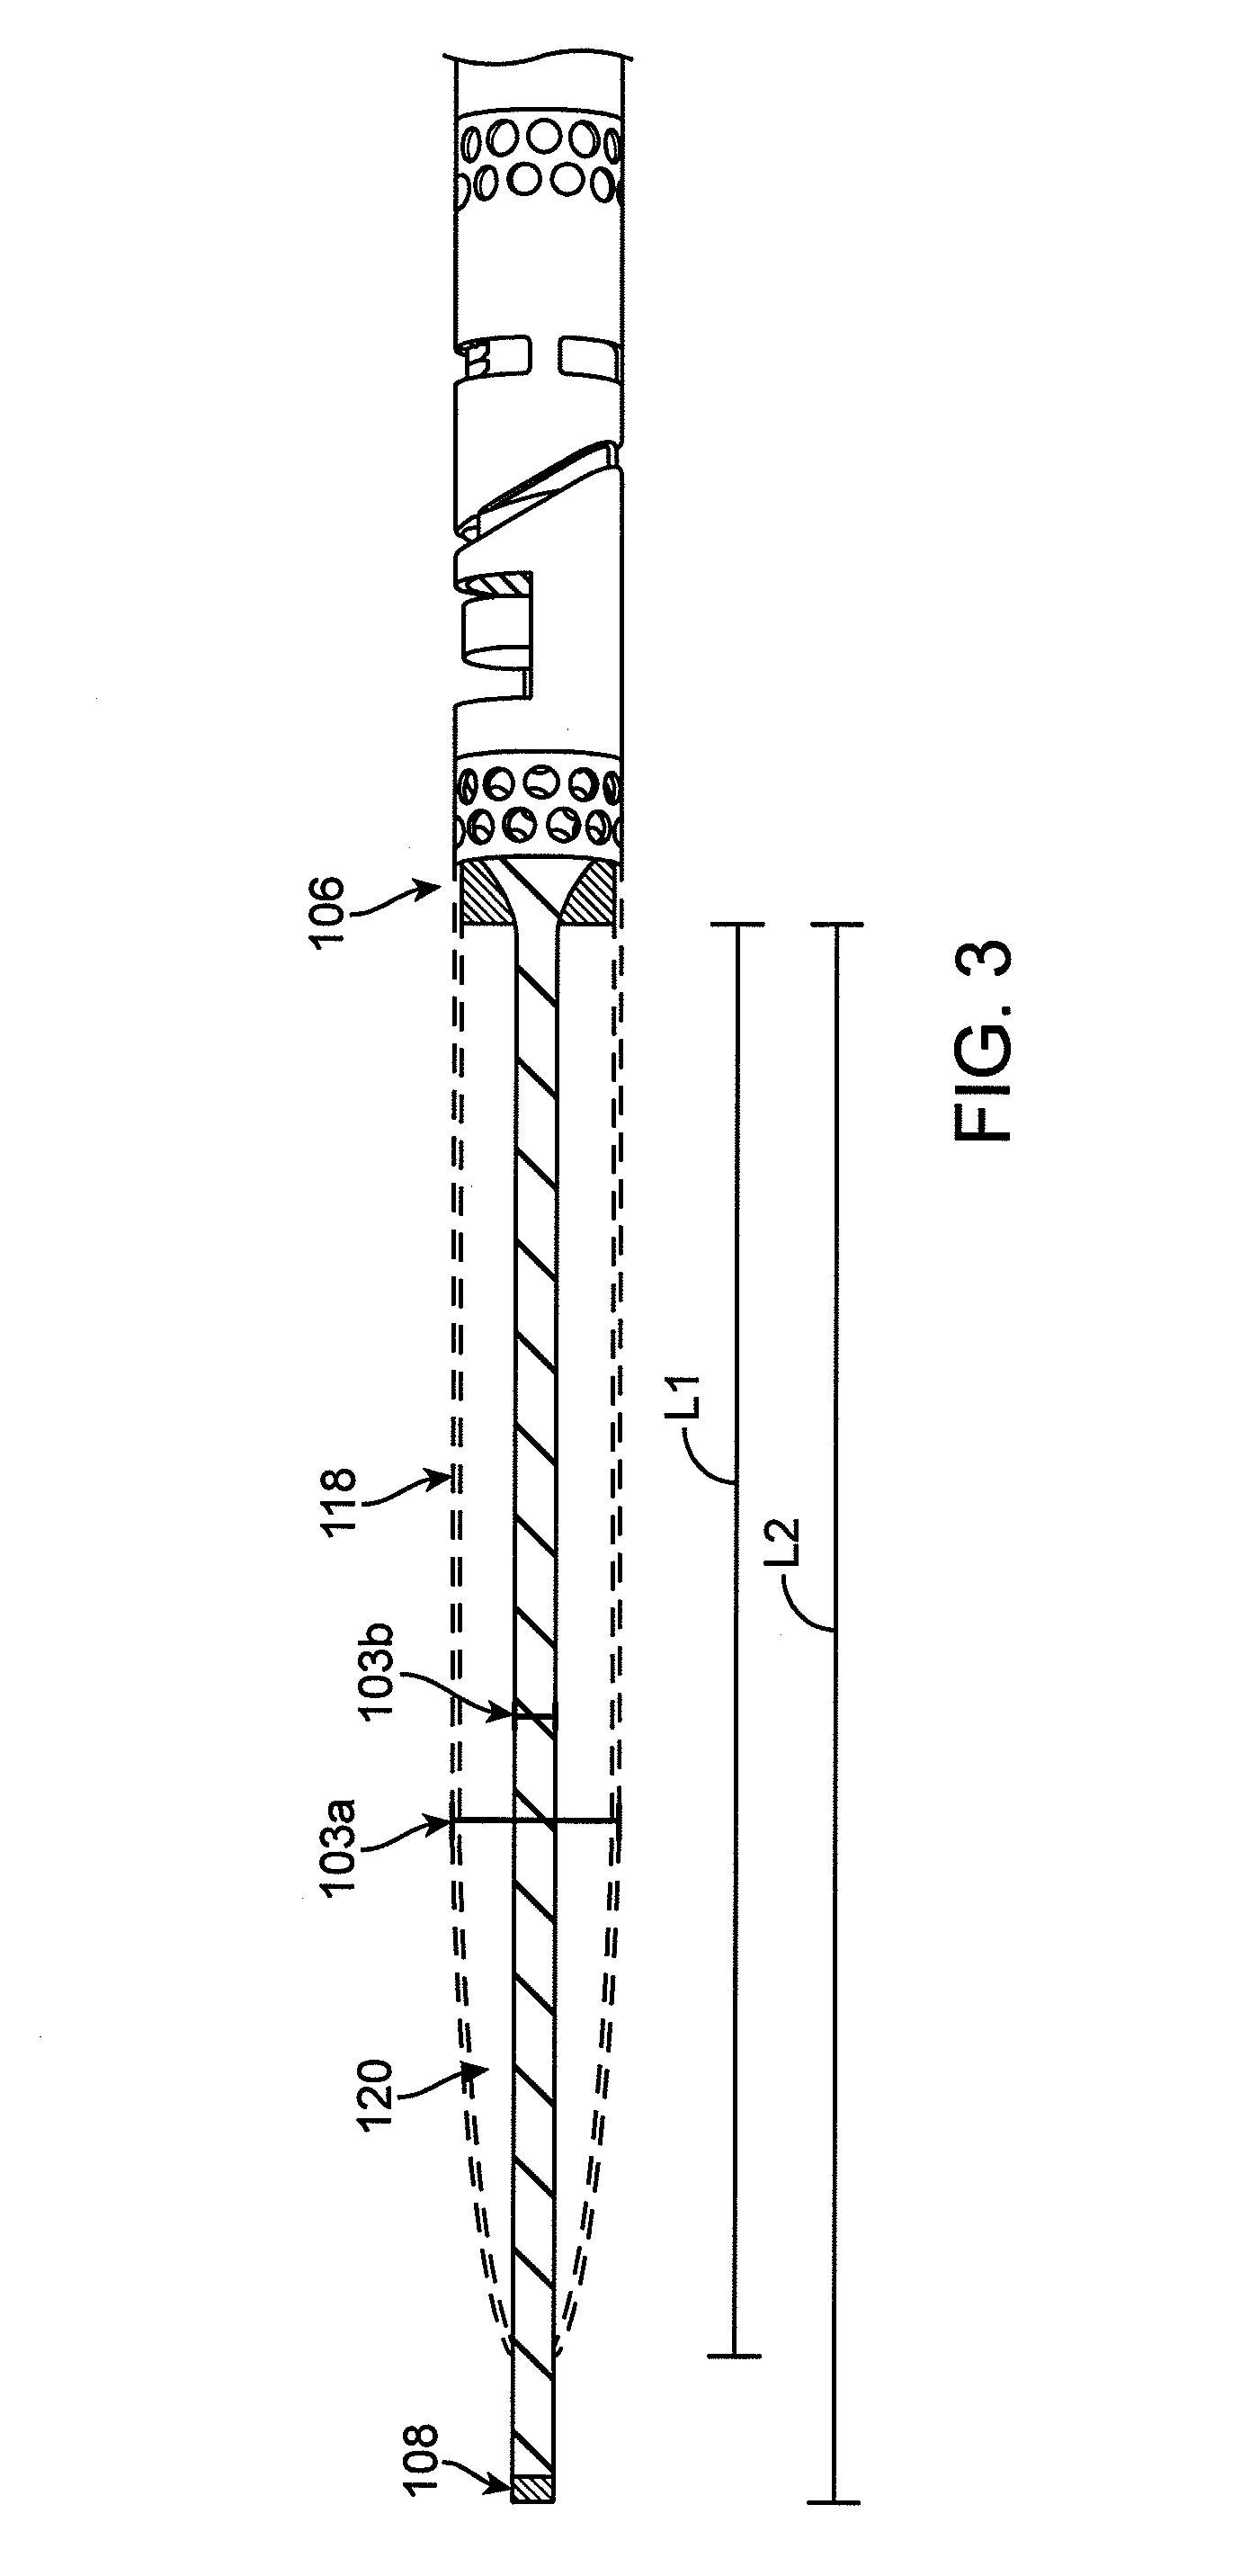 Tissue collection device for catheter